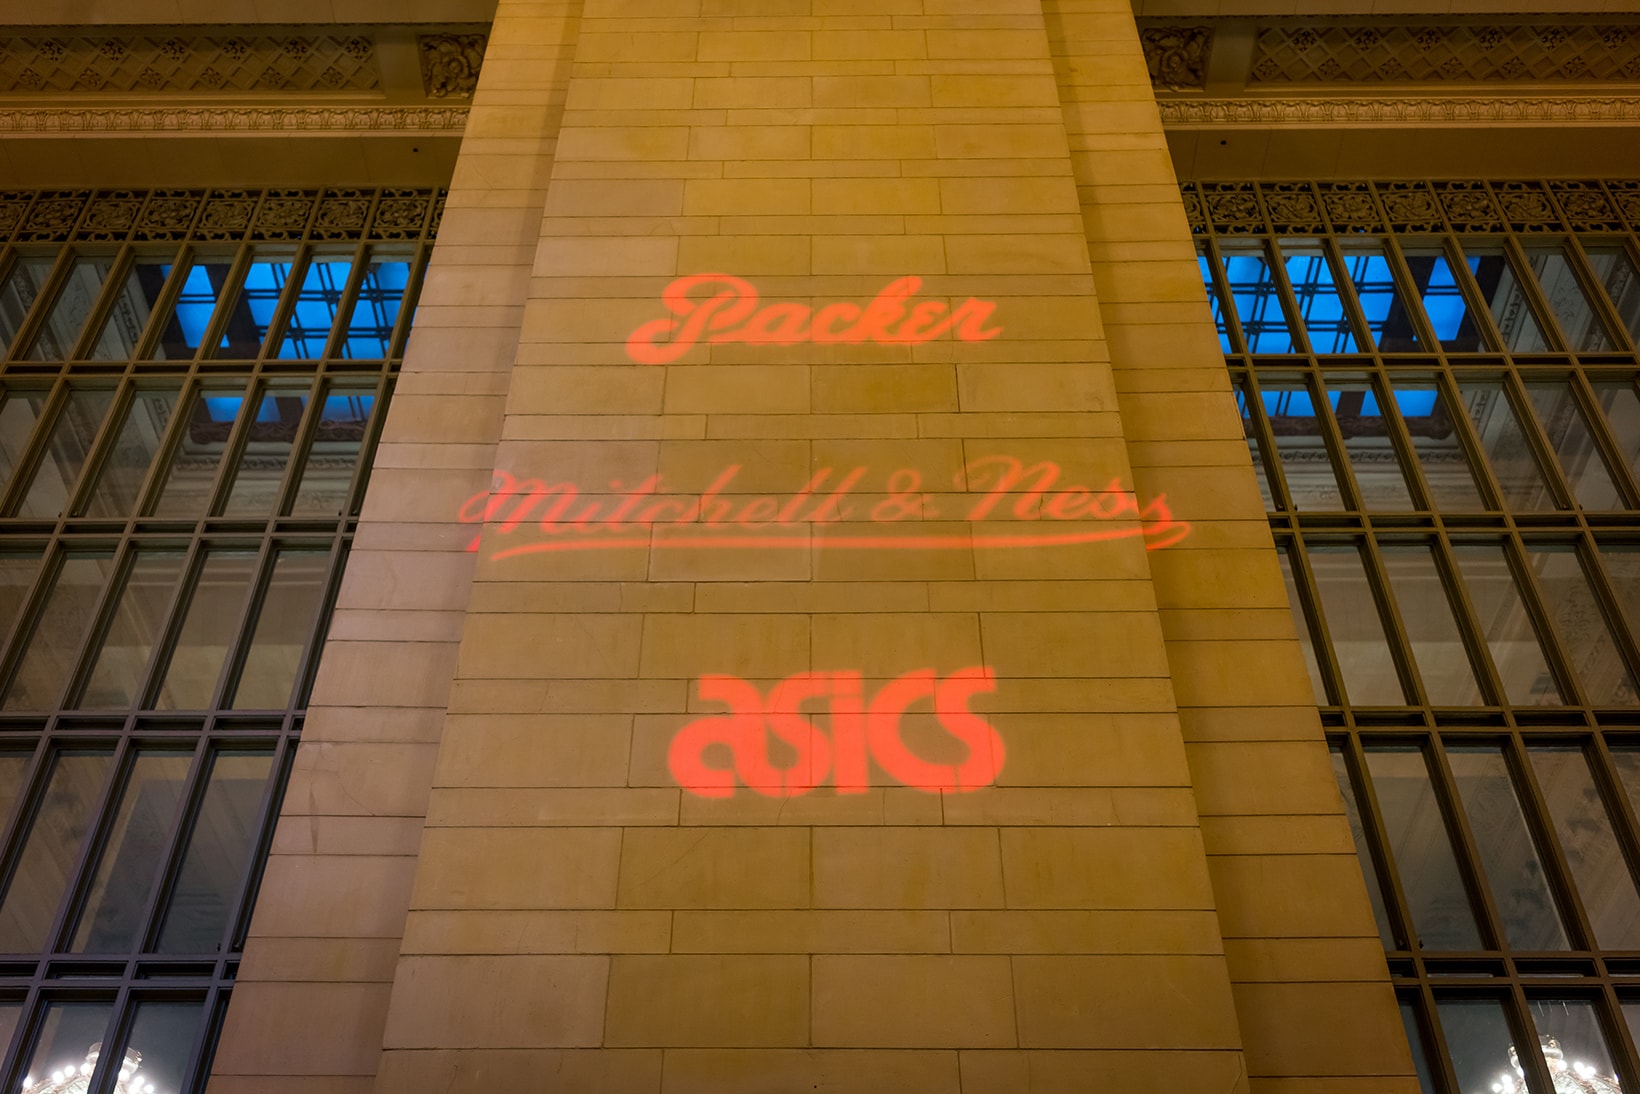 Packer Shoes ASICS Mitchell Ness NYC Pop Up